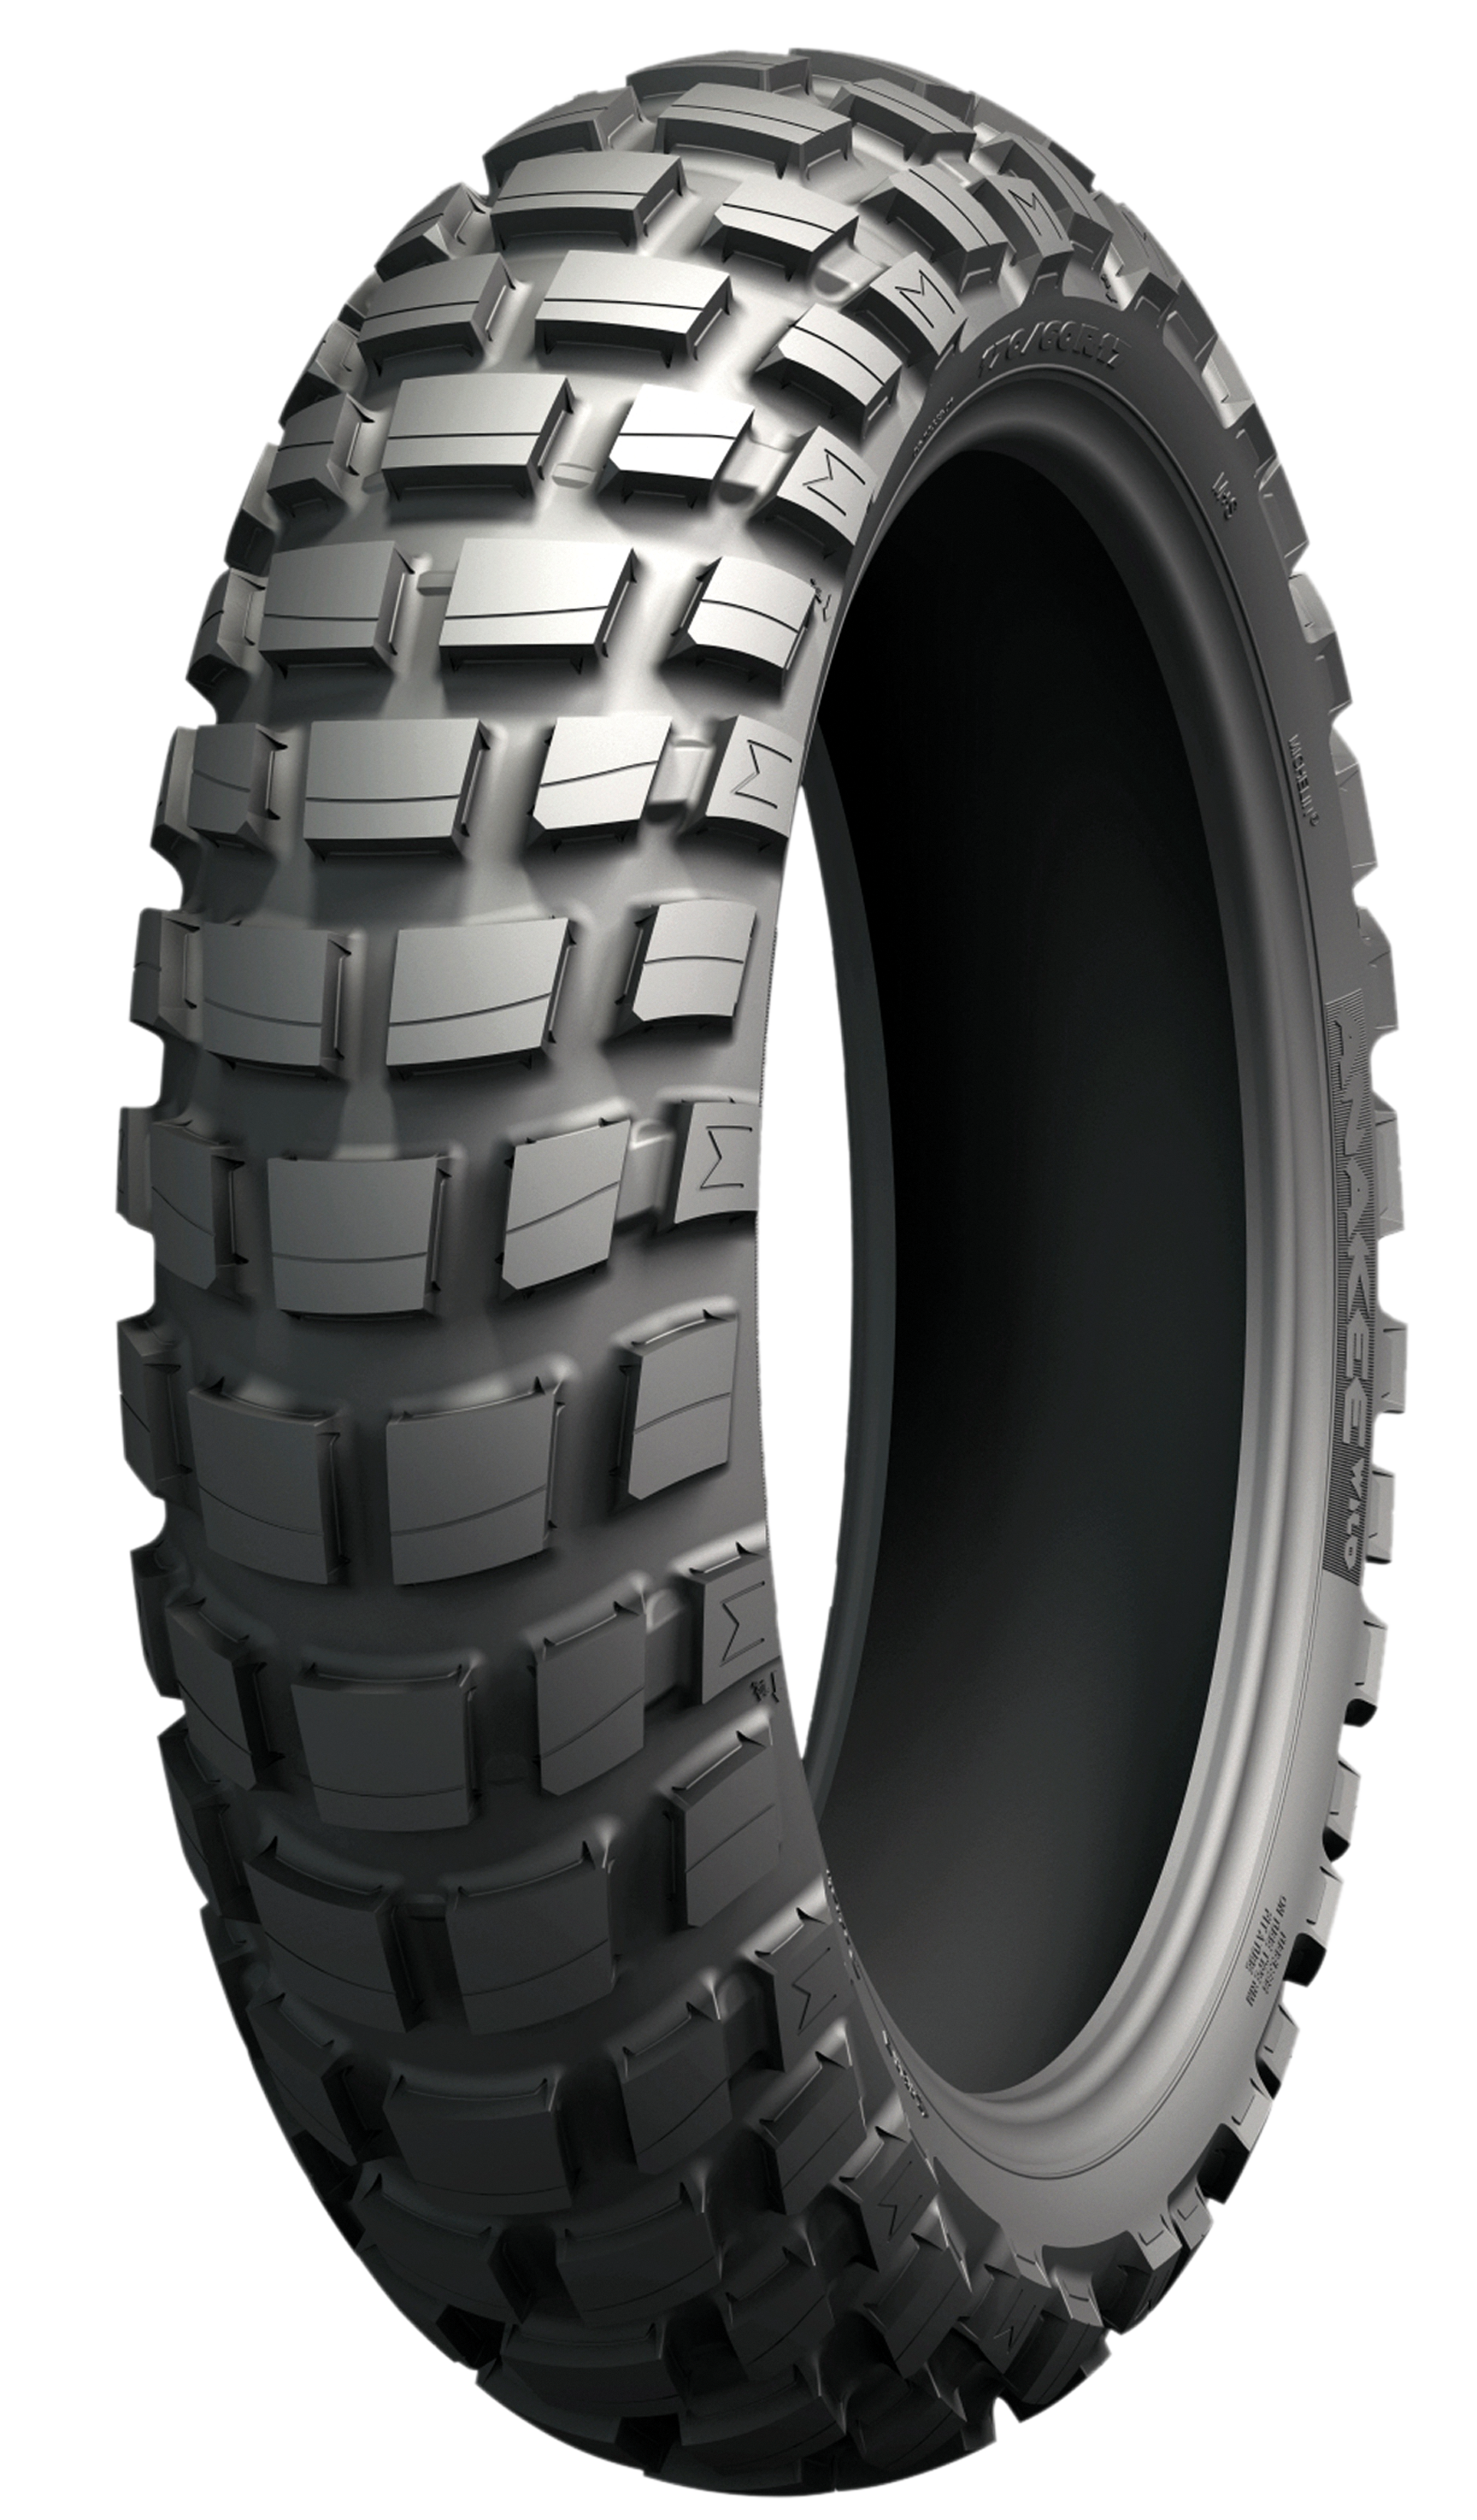 Anvelopa michelin anakee wild spate 120/80-18 62s